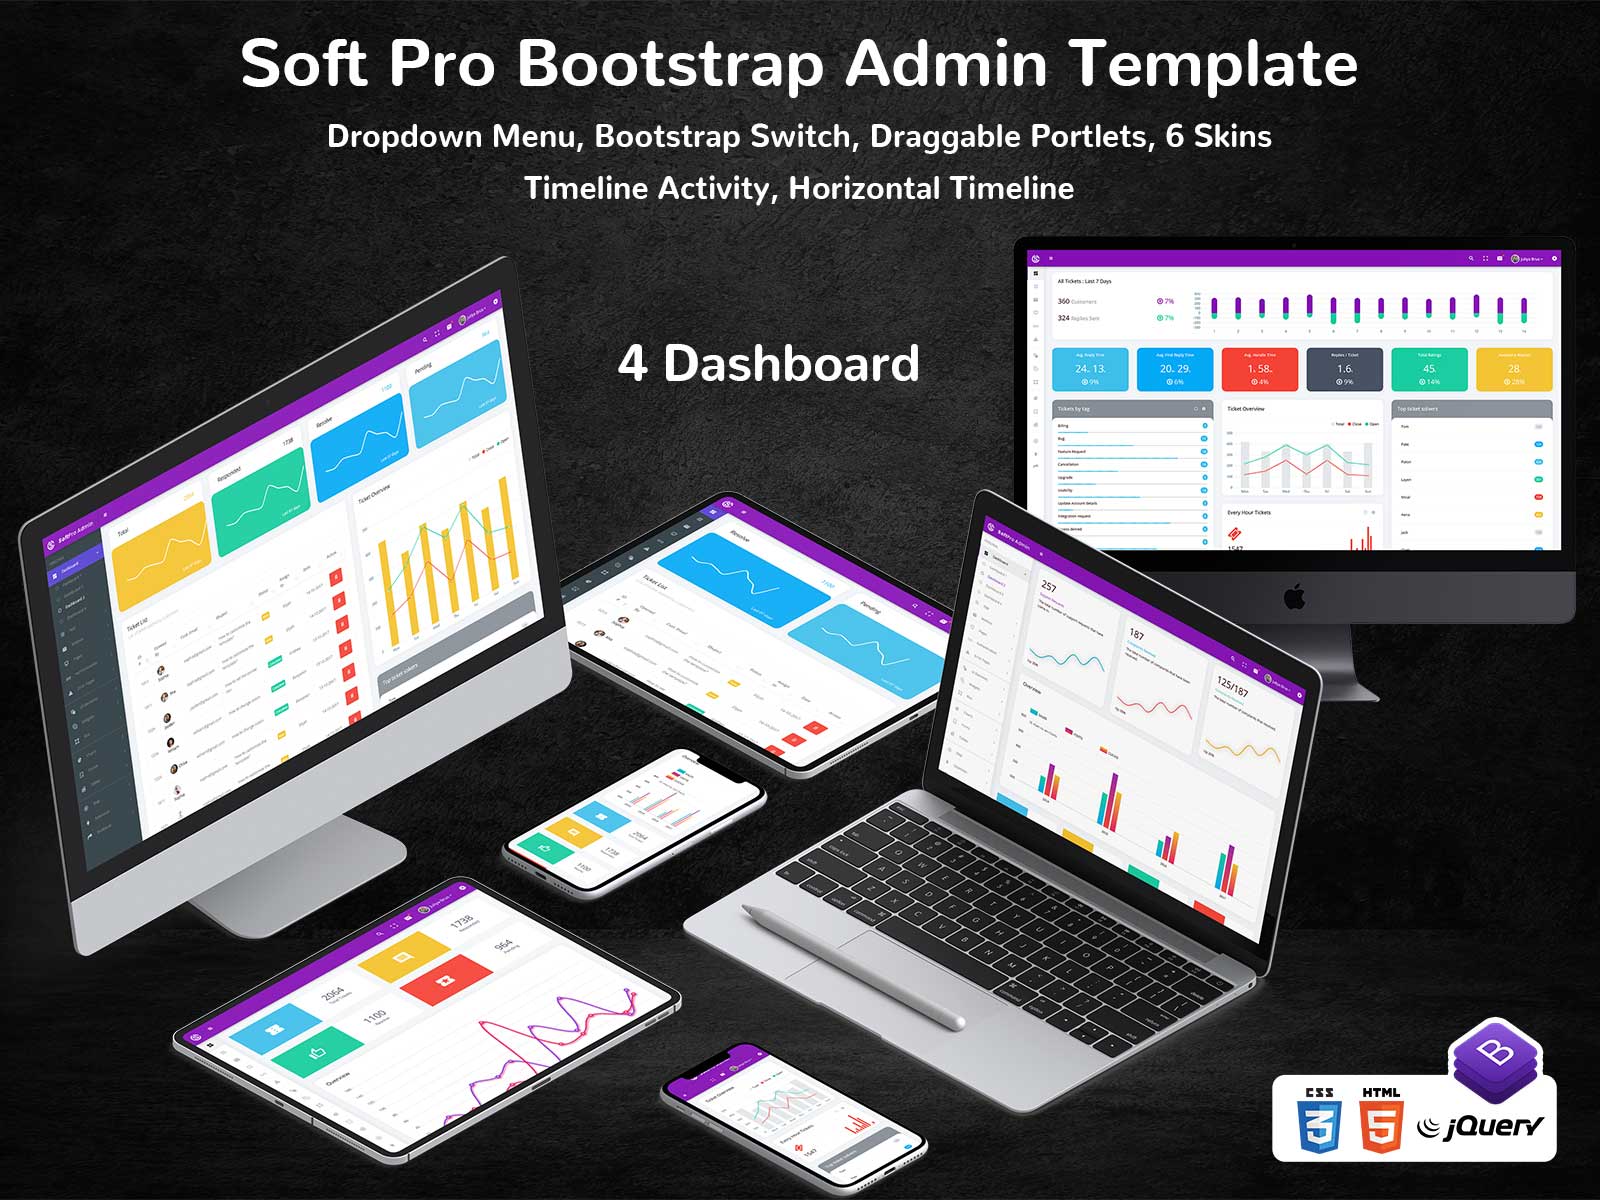 Bootstrap Admin Template With Admin Panel – Soft Pro